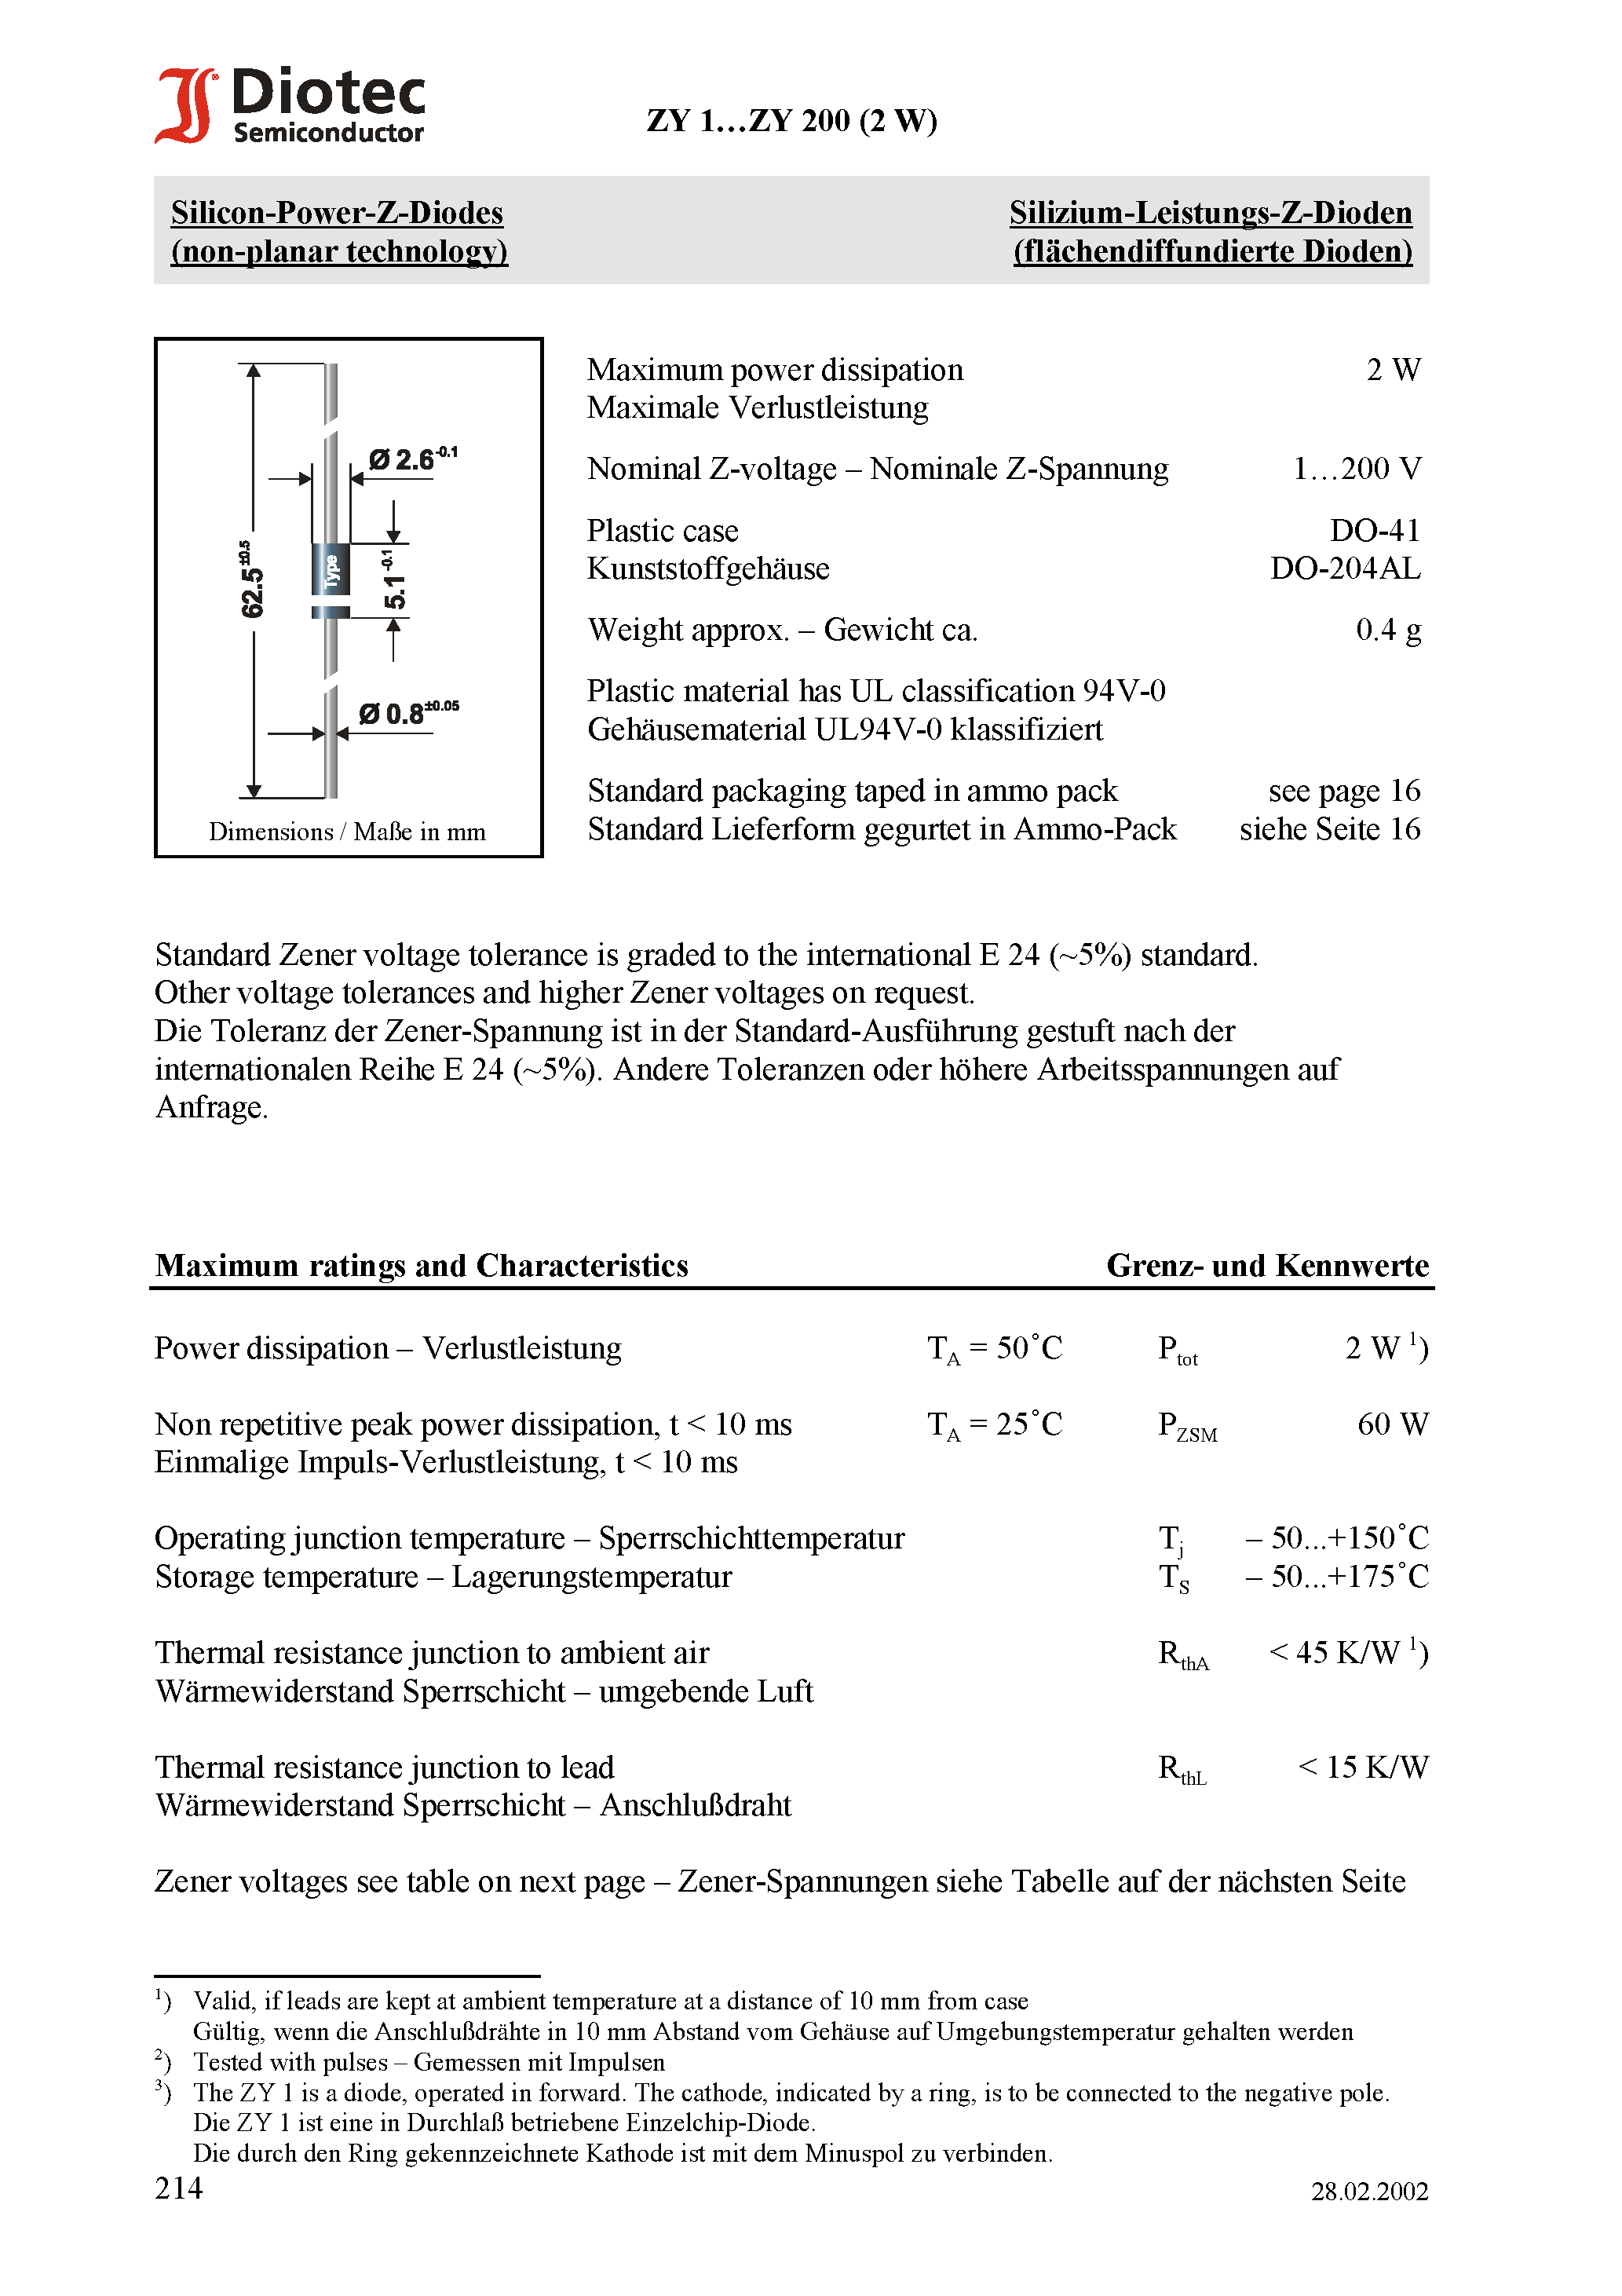 Datasheet ZY4.7 - Silicon-Power-Z-Diodes (non-planar technology) page 1